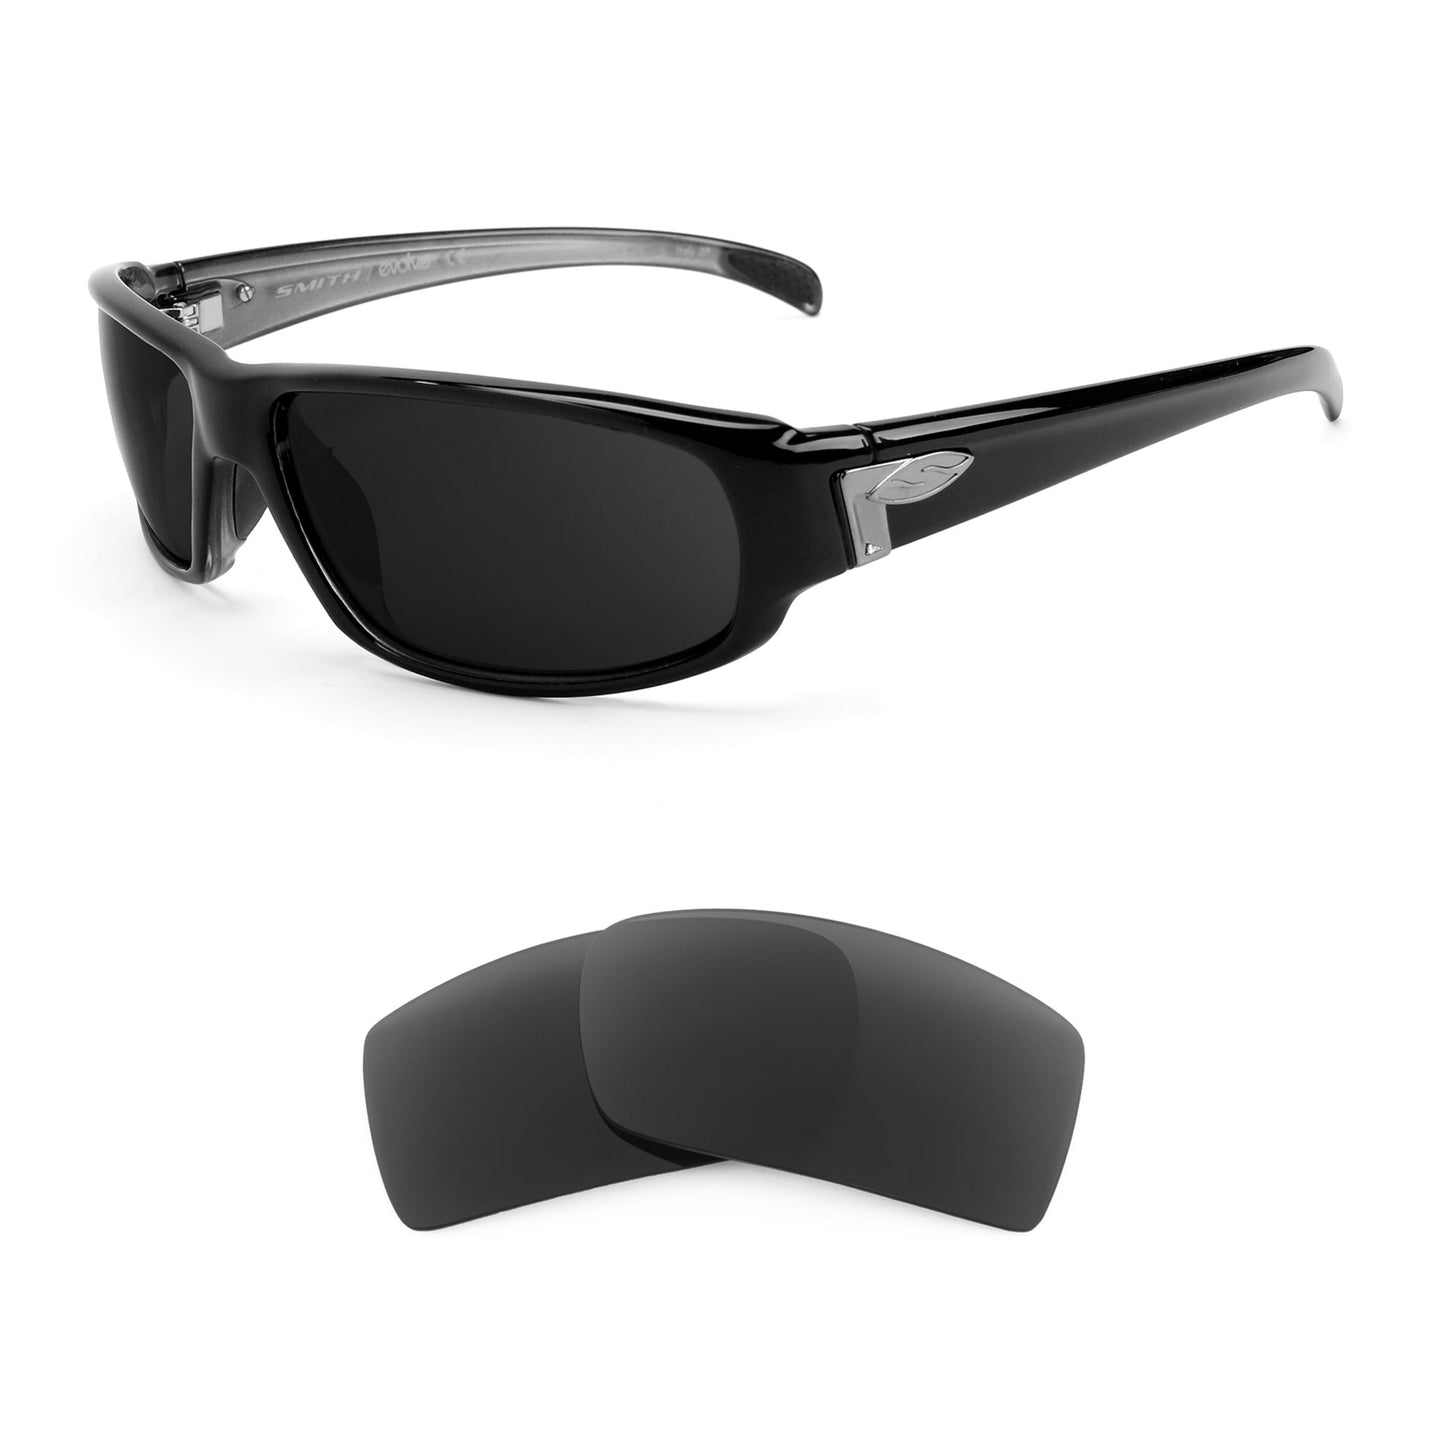 Smith Precept sunglasses with replacement lenses